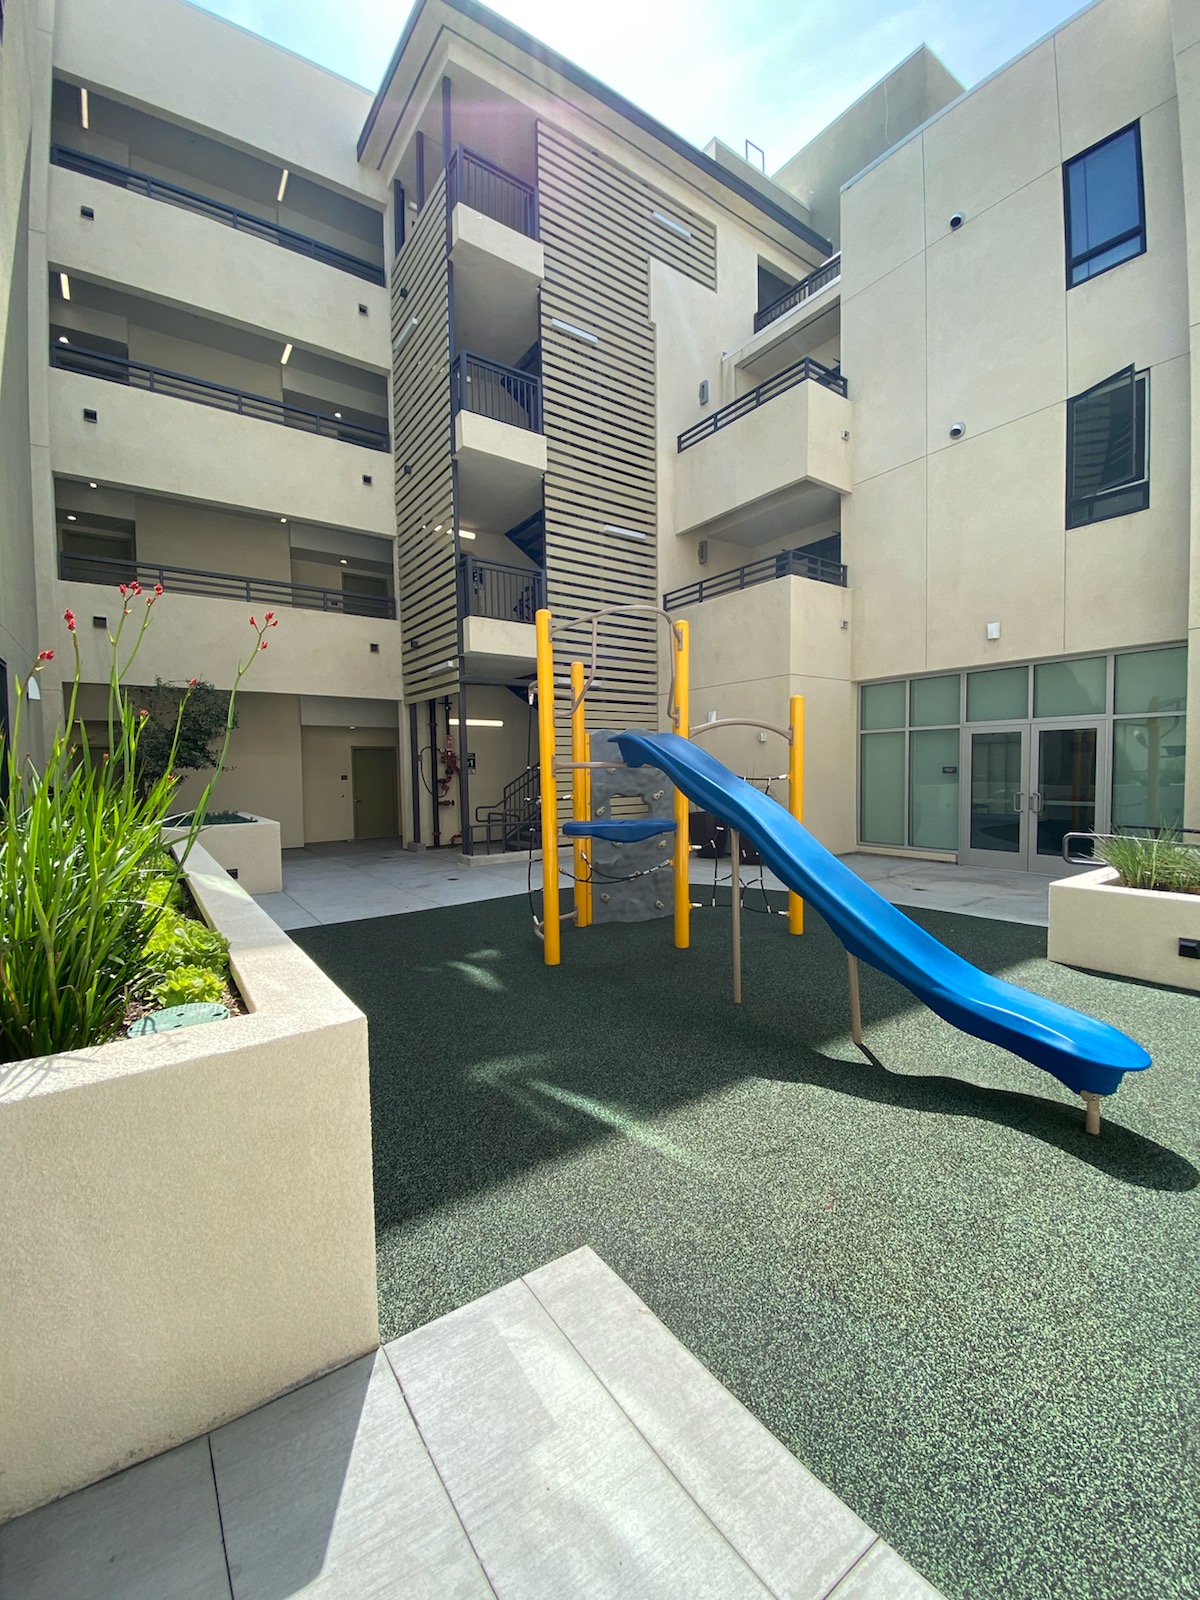 playground in the center of green floor. Planter to the left, staircase for building at the far end.